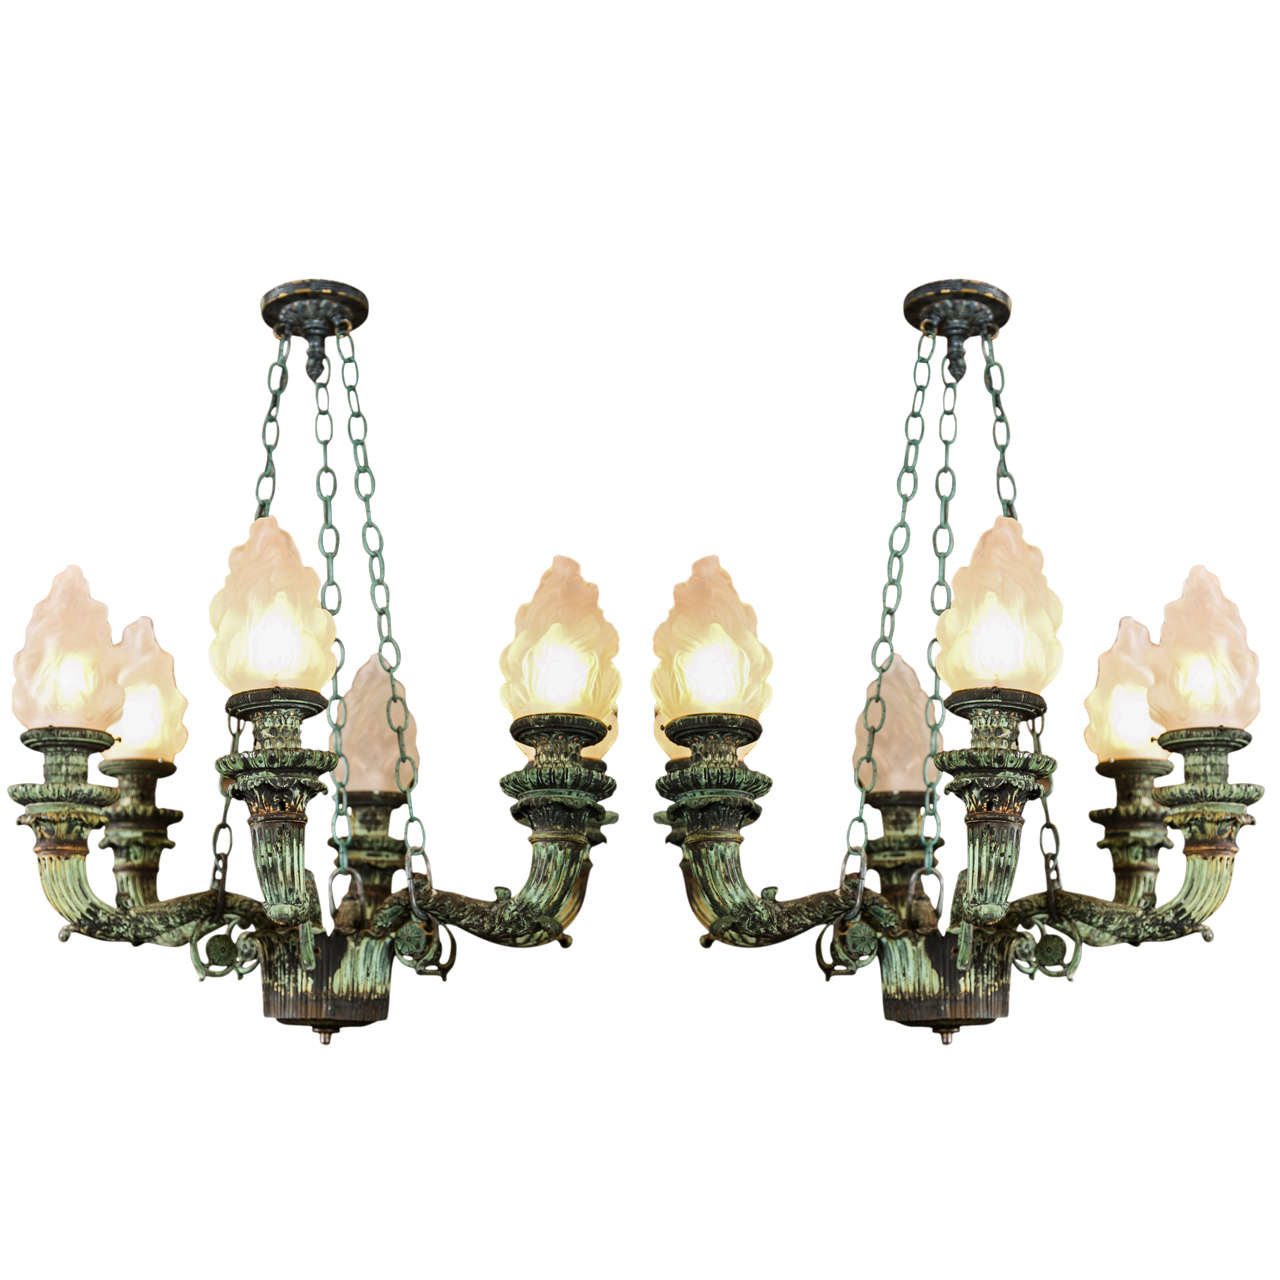 Pair of Antique Bronze Chandeliers Salvaged From Archiitectural Design